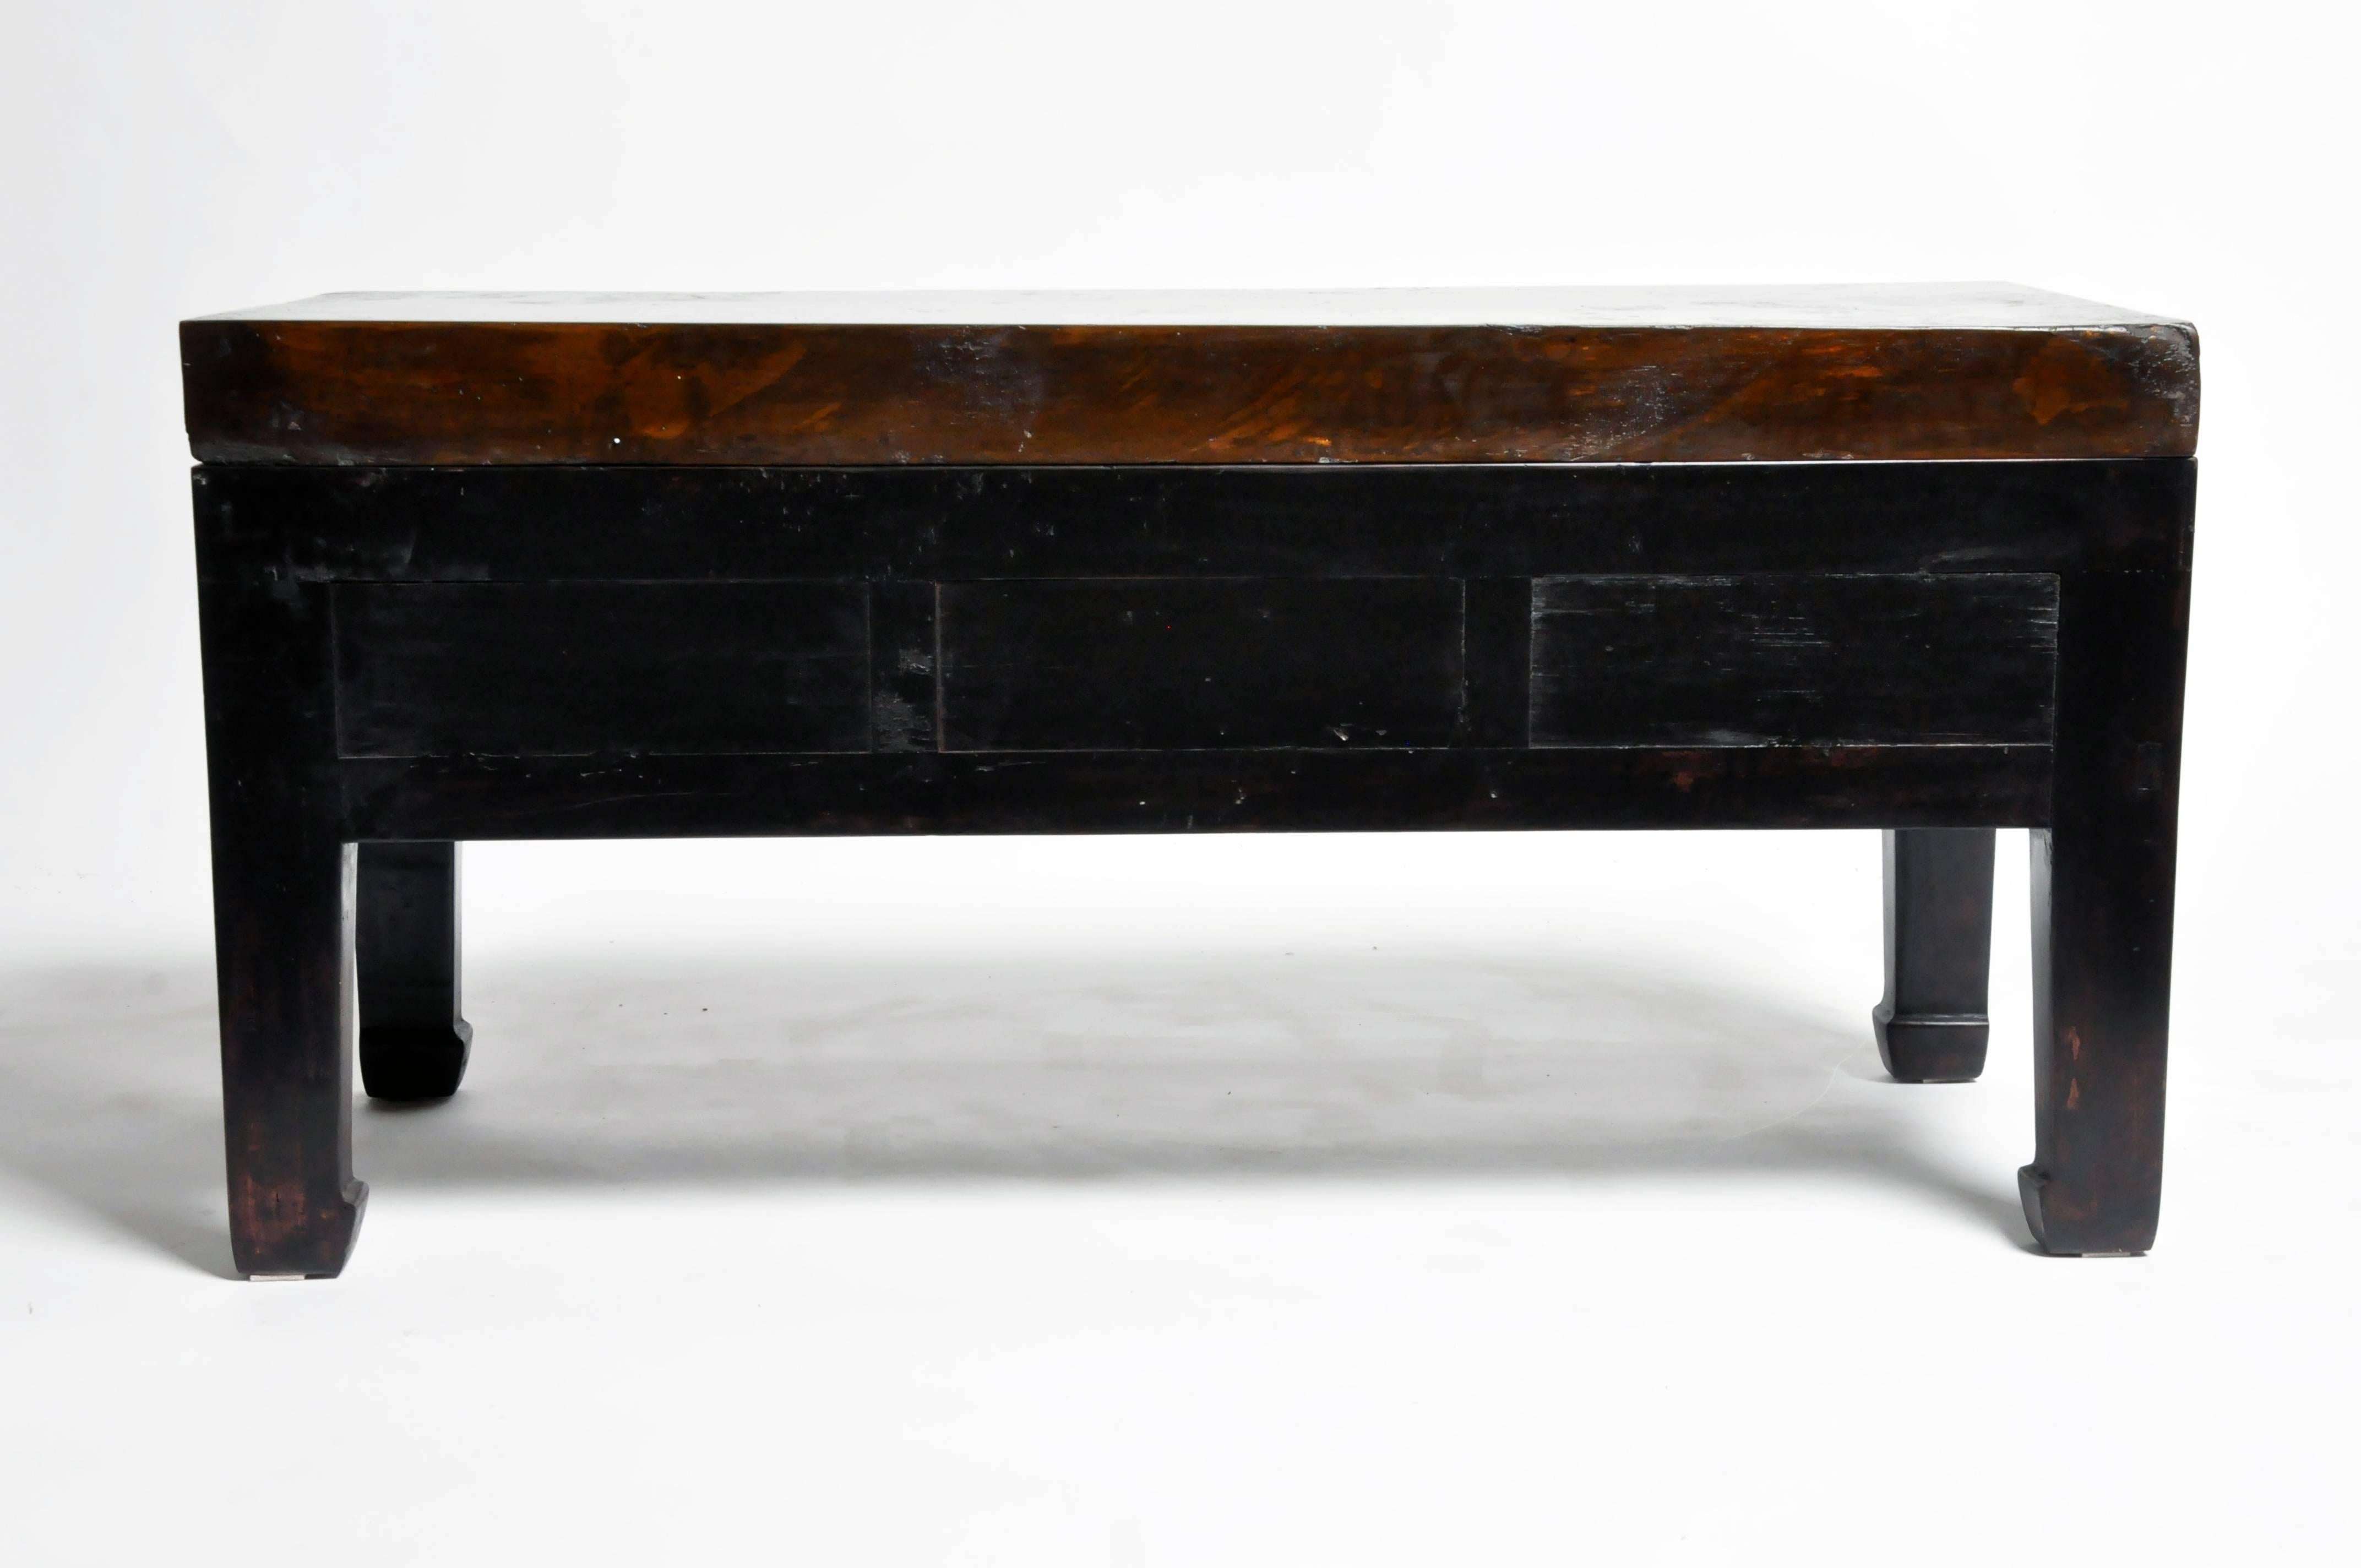 This handsome low table is from Jiangsu, China and was made from reclaimed elmwood and terracotta. The piece features mortise and Tenon joinery, three drawers, and a terracotta top. You can also customize it and make it your own. Wood, color,